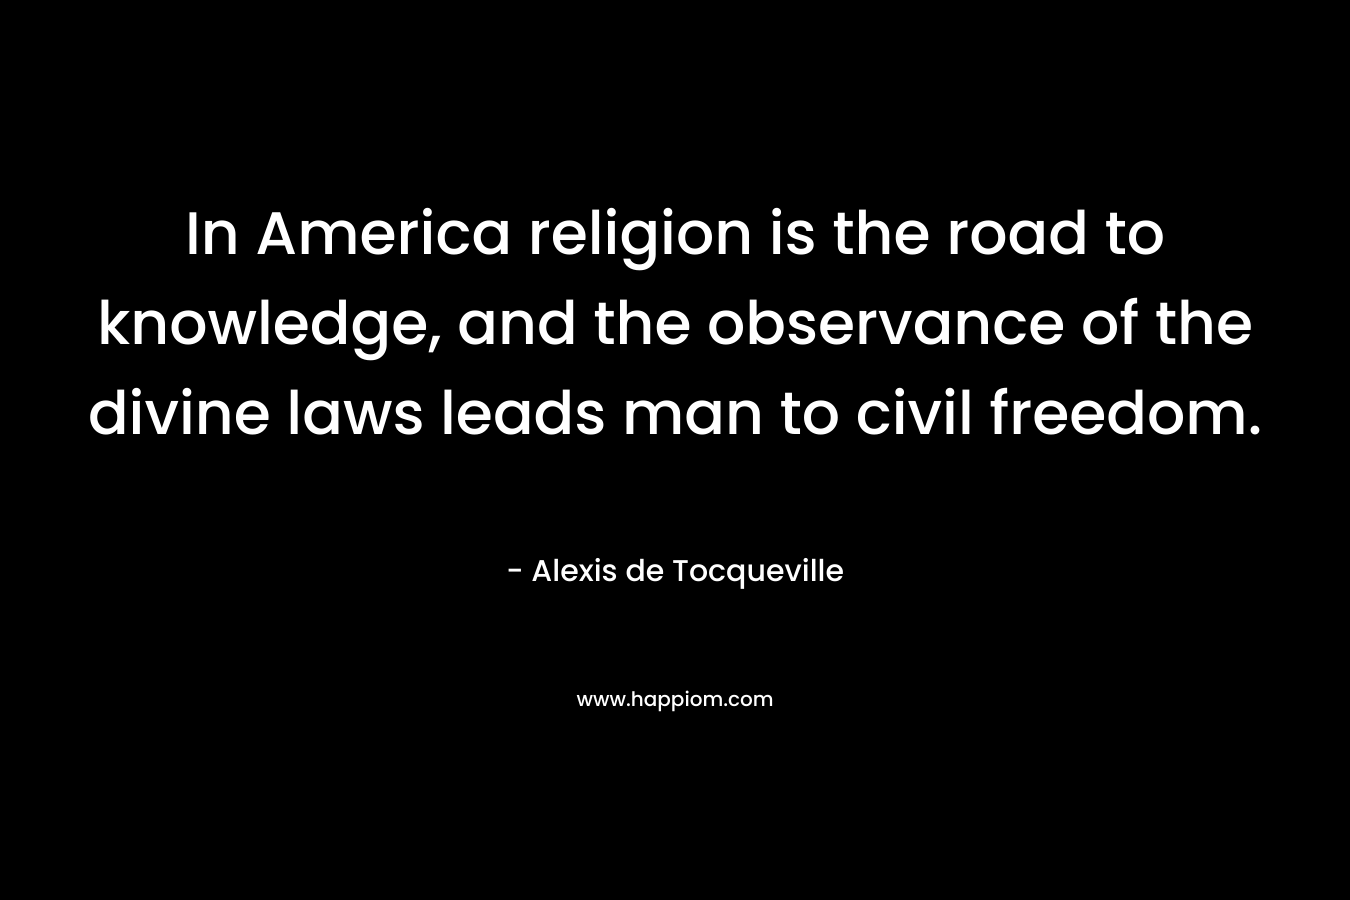 In America religion is the road to knowledge, and the observance of the divine laws leads man to civil freedom.